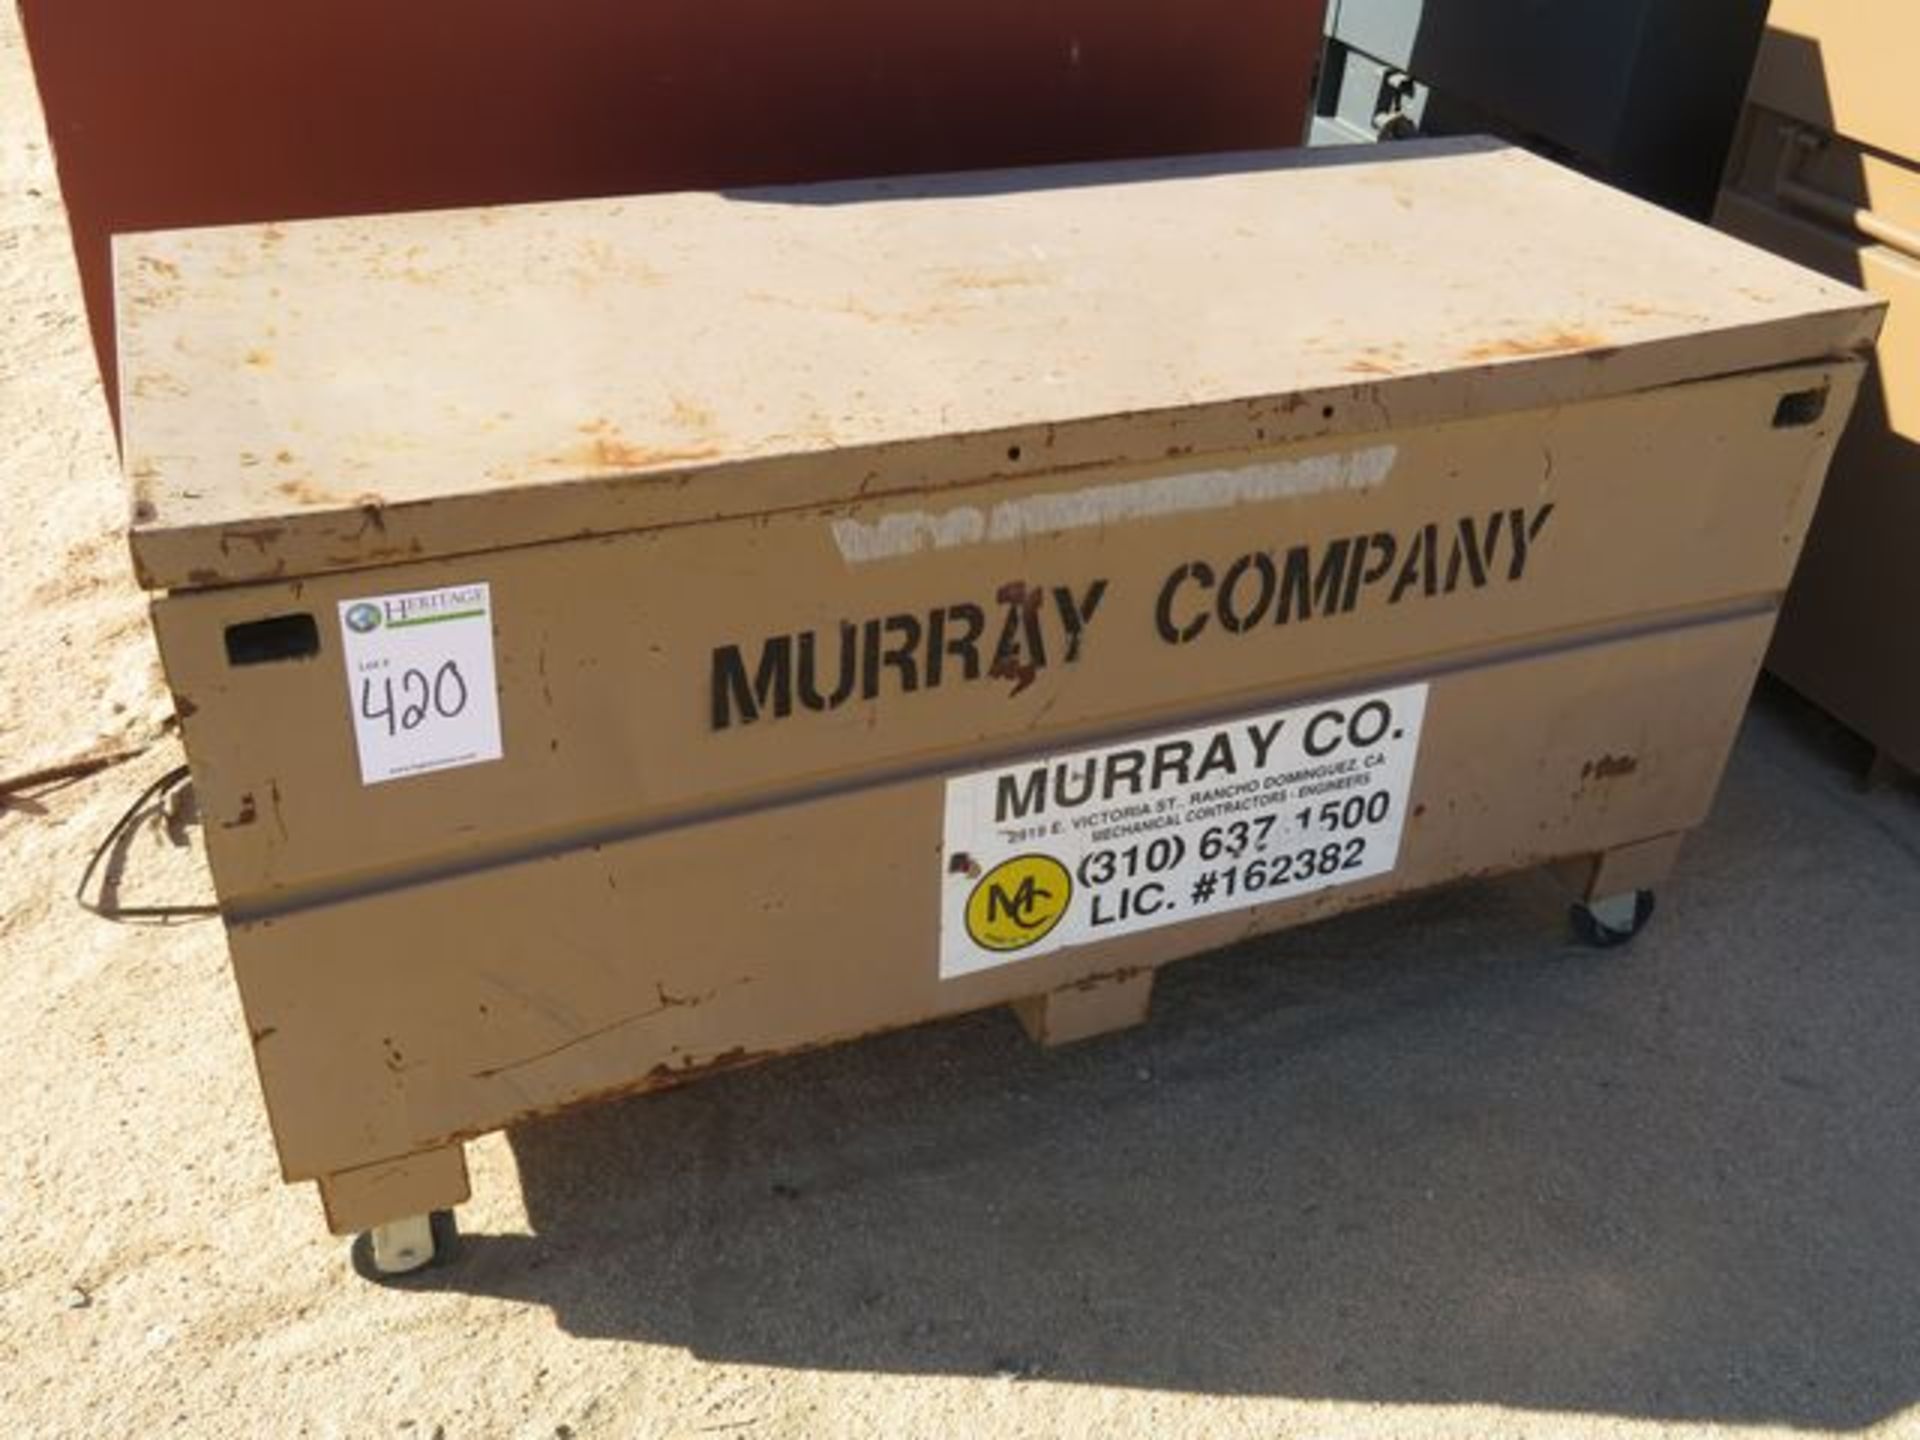 Murray Tool Chest. 60" x 24" x 33", on Castors. Asset Located at 42134 Harper Lake Road, Hinkley, CA